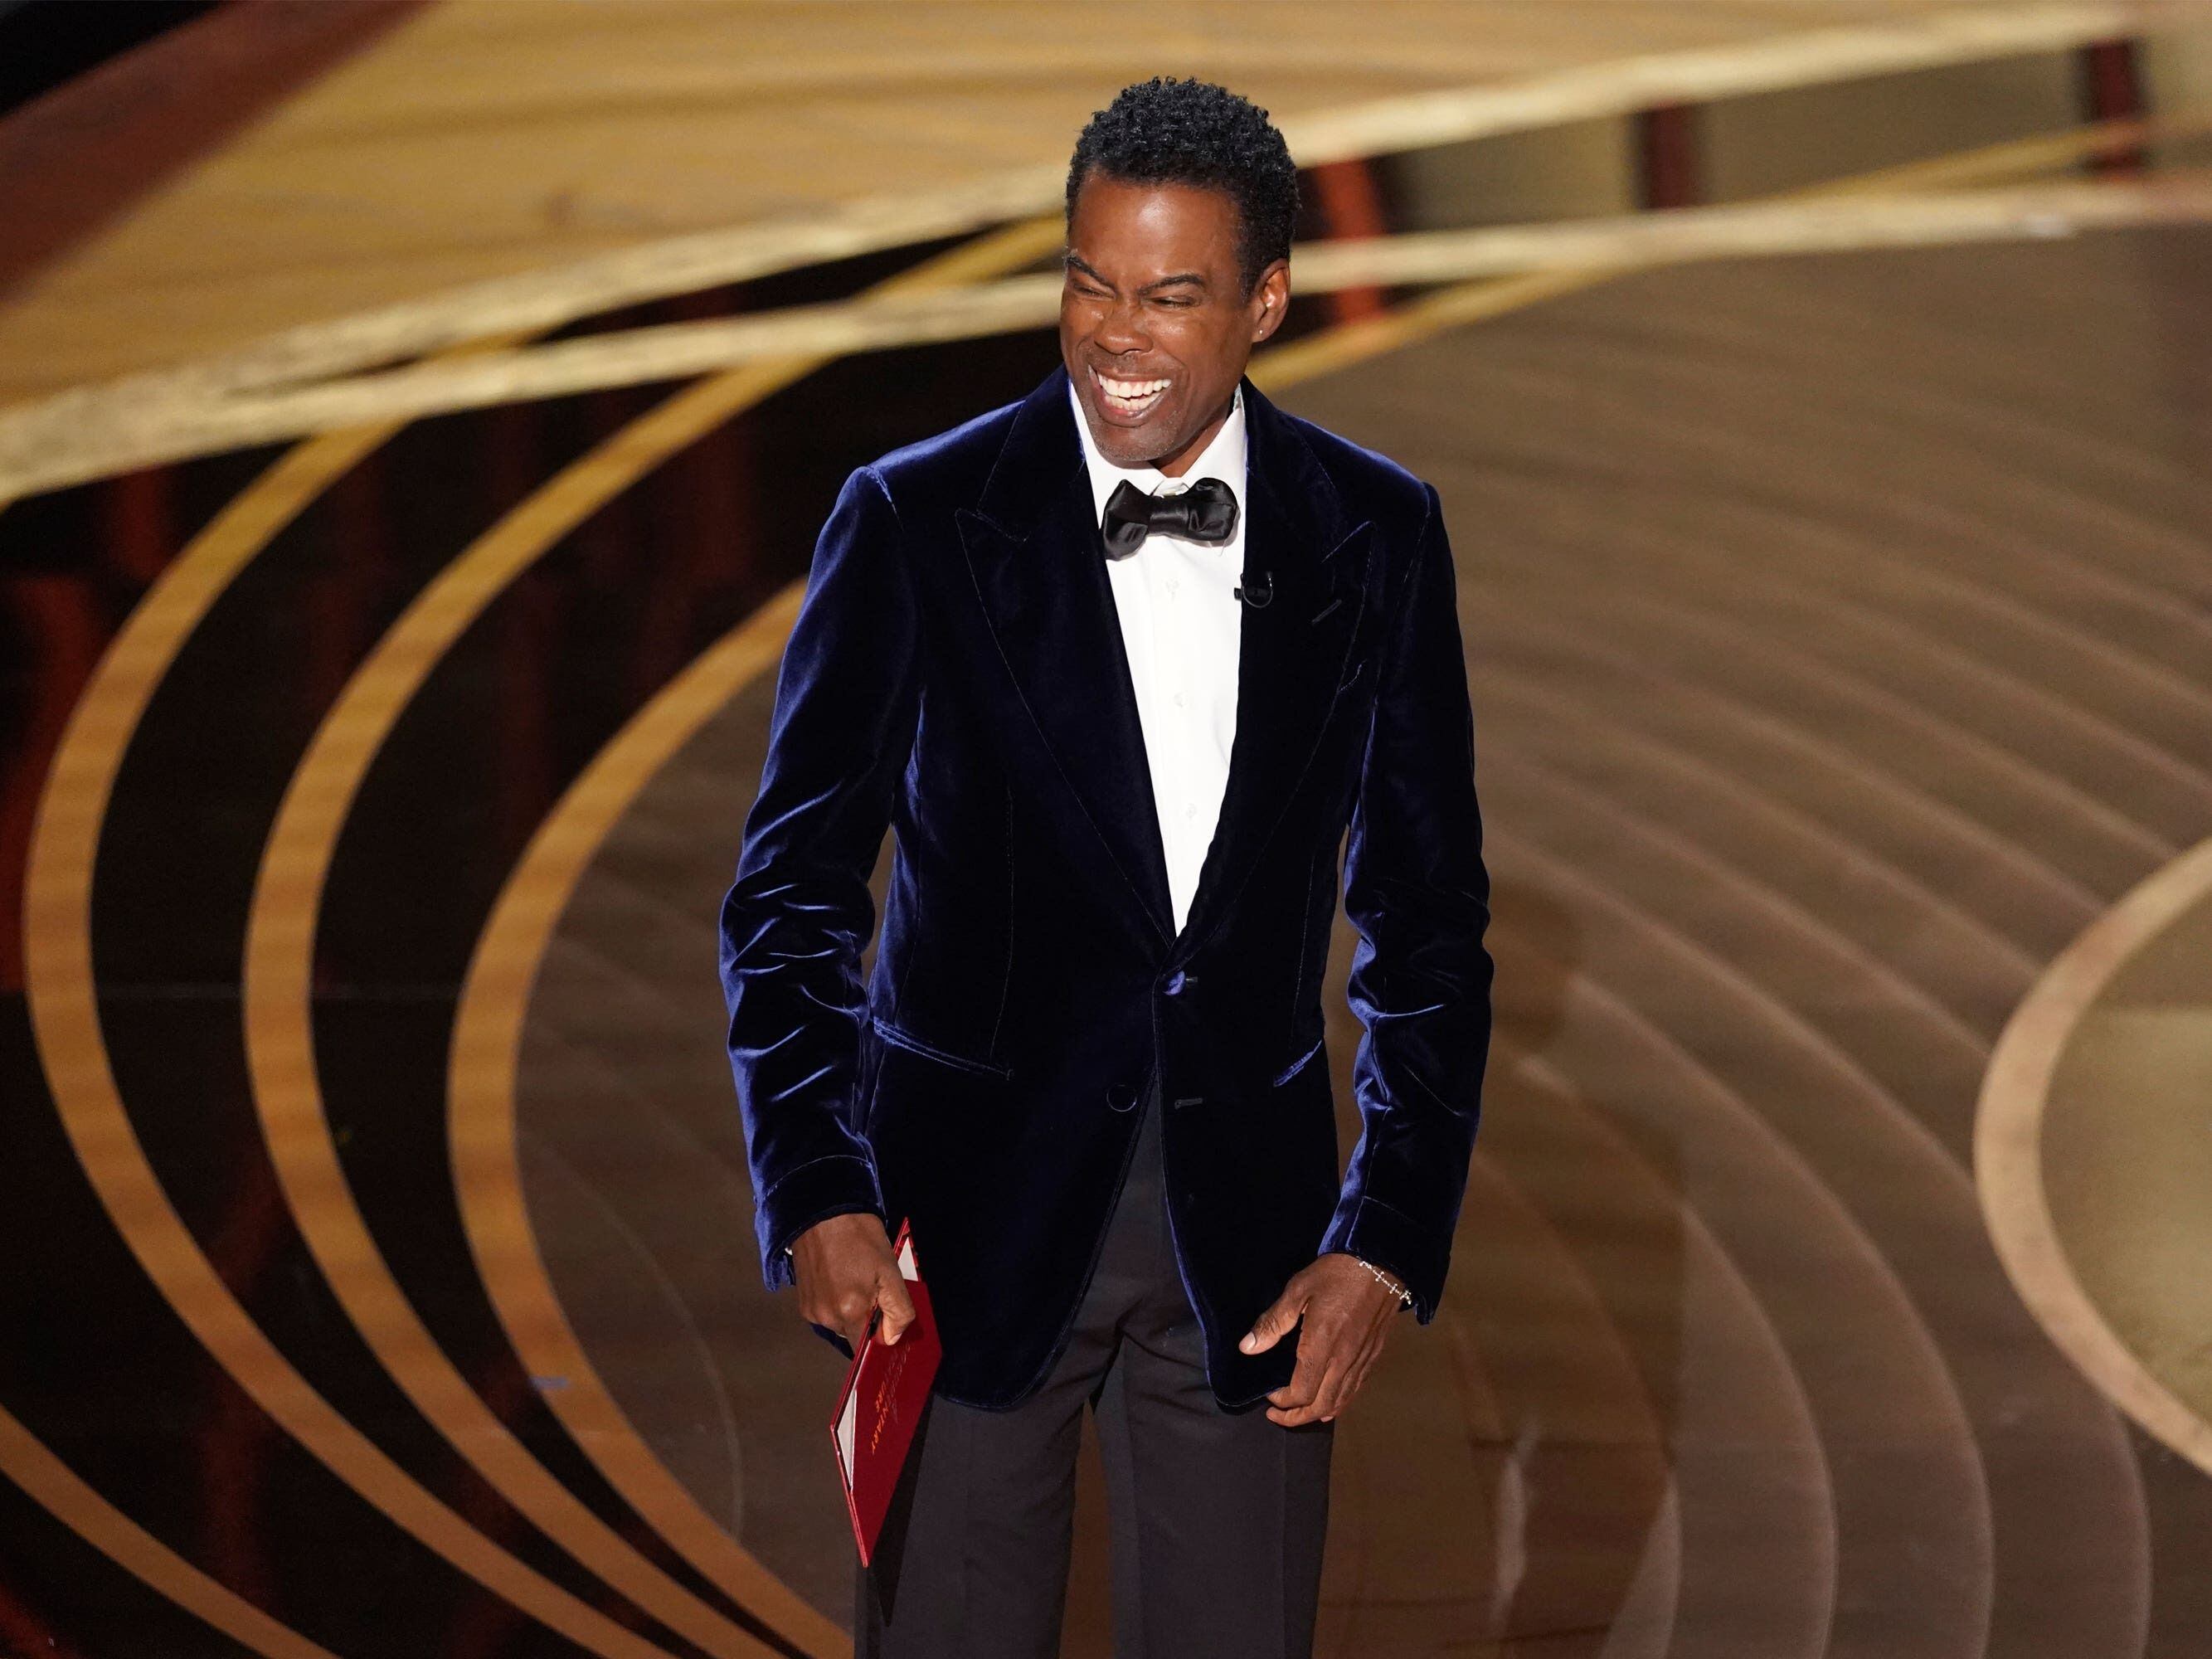 Ticket sales for Chris Rock stand-up tour increase after Will Smith altercation